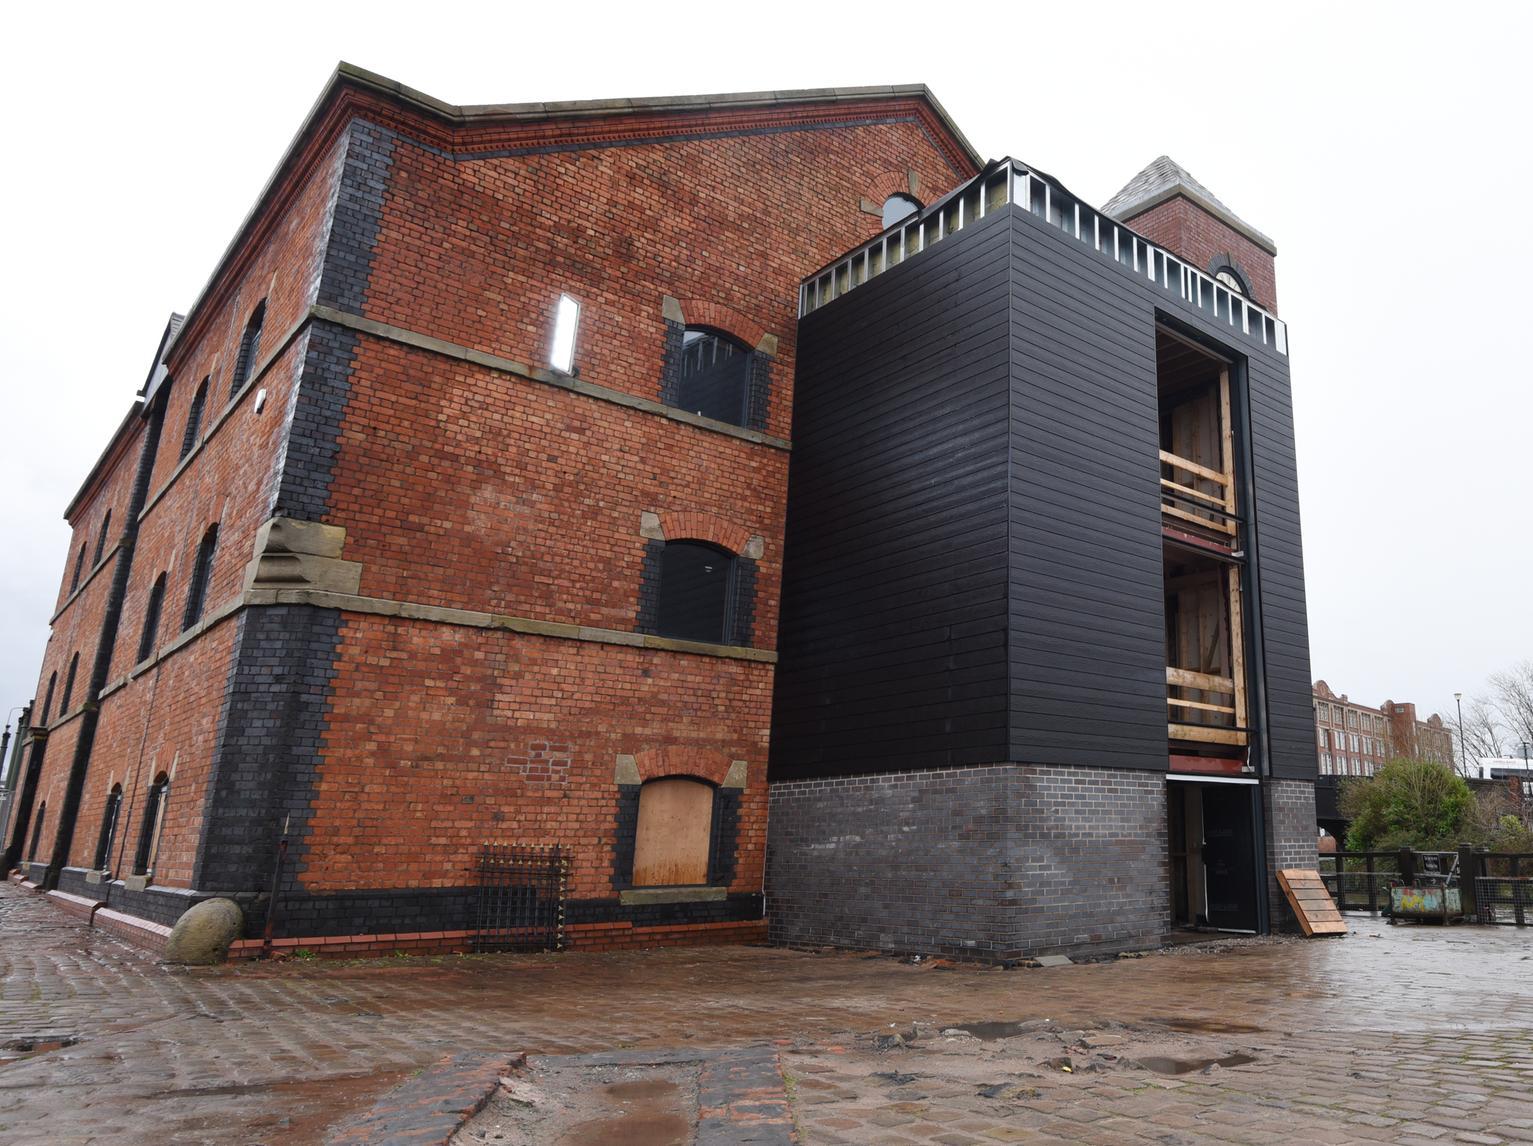 Outside the former pub, The Orwell, at the Wigan Pier redevelopment